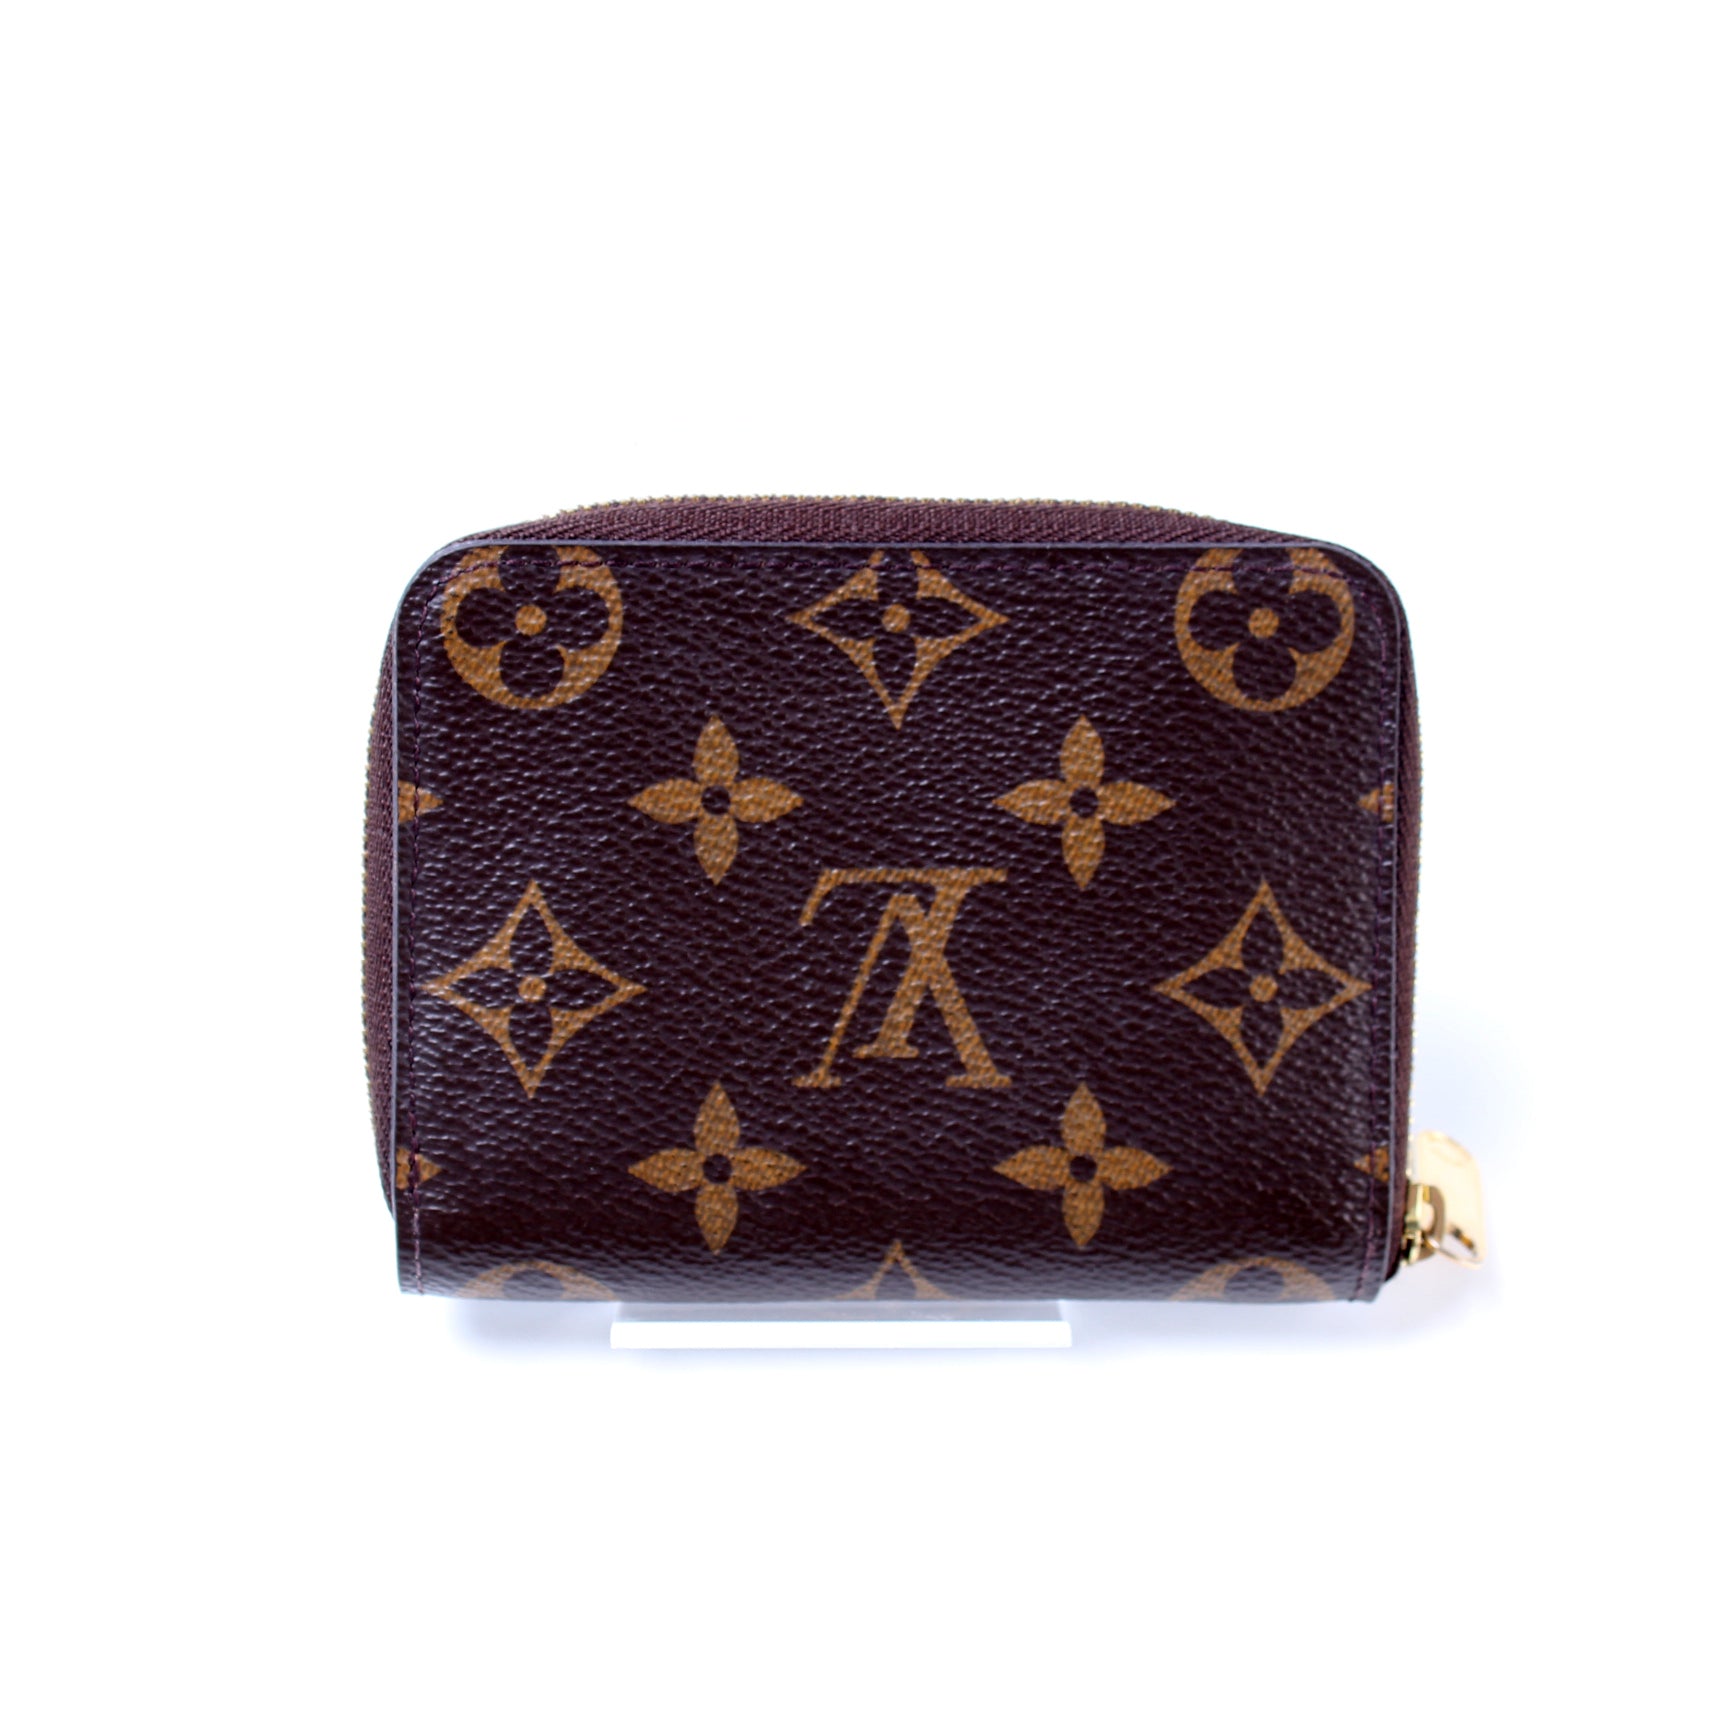 Louis Vuitton comparison between the zippy coin purse and the